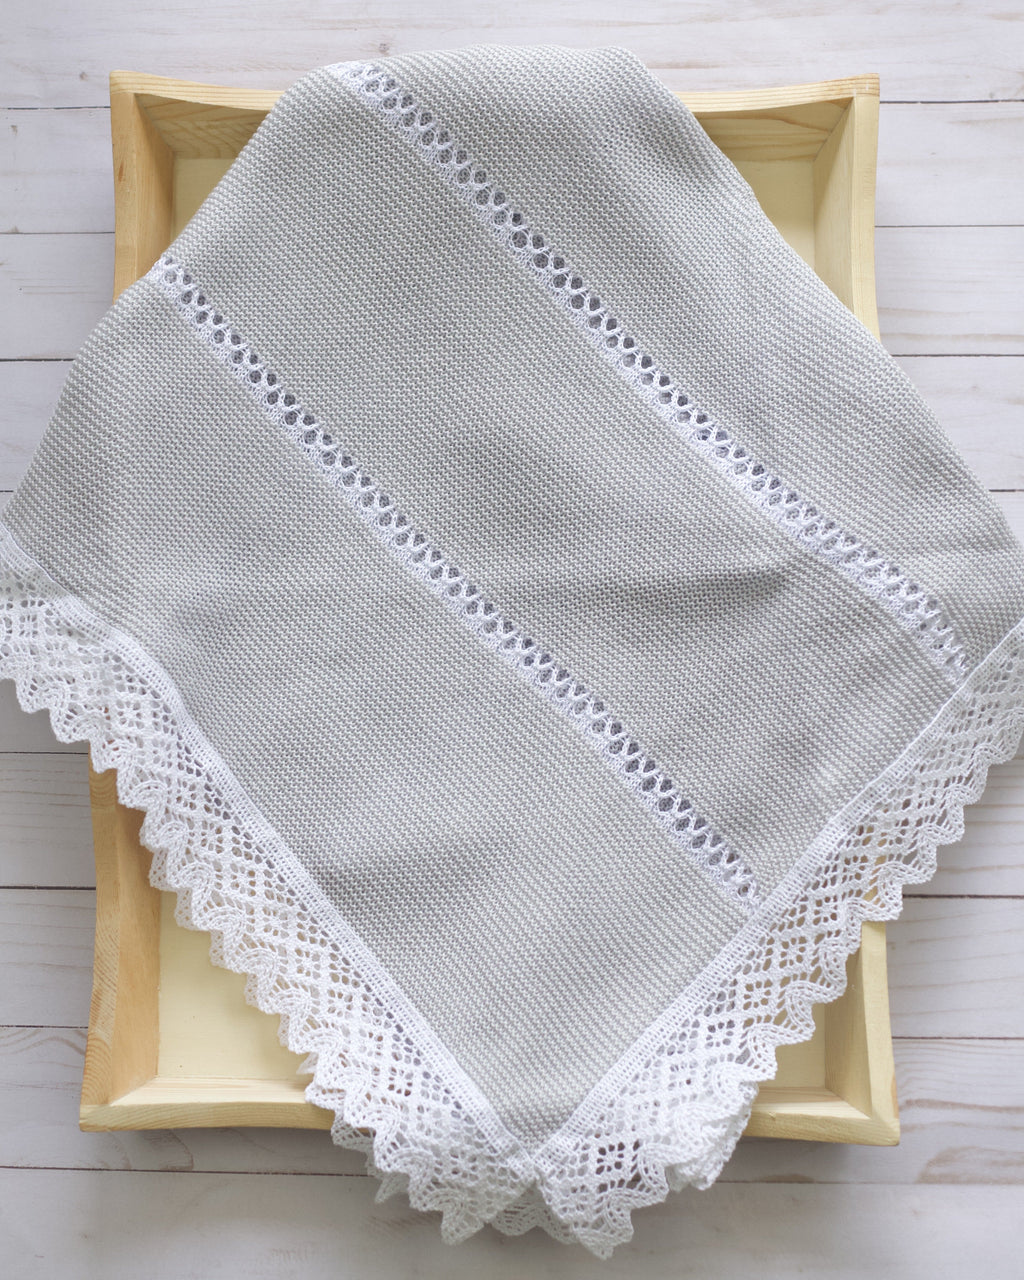 Knitted grey blanket for newborn baby girls and boys. Made in Spain